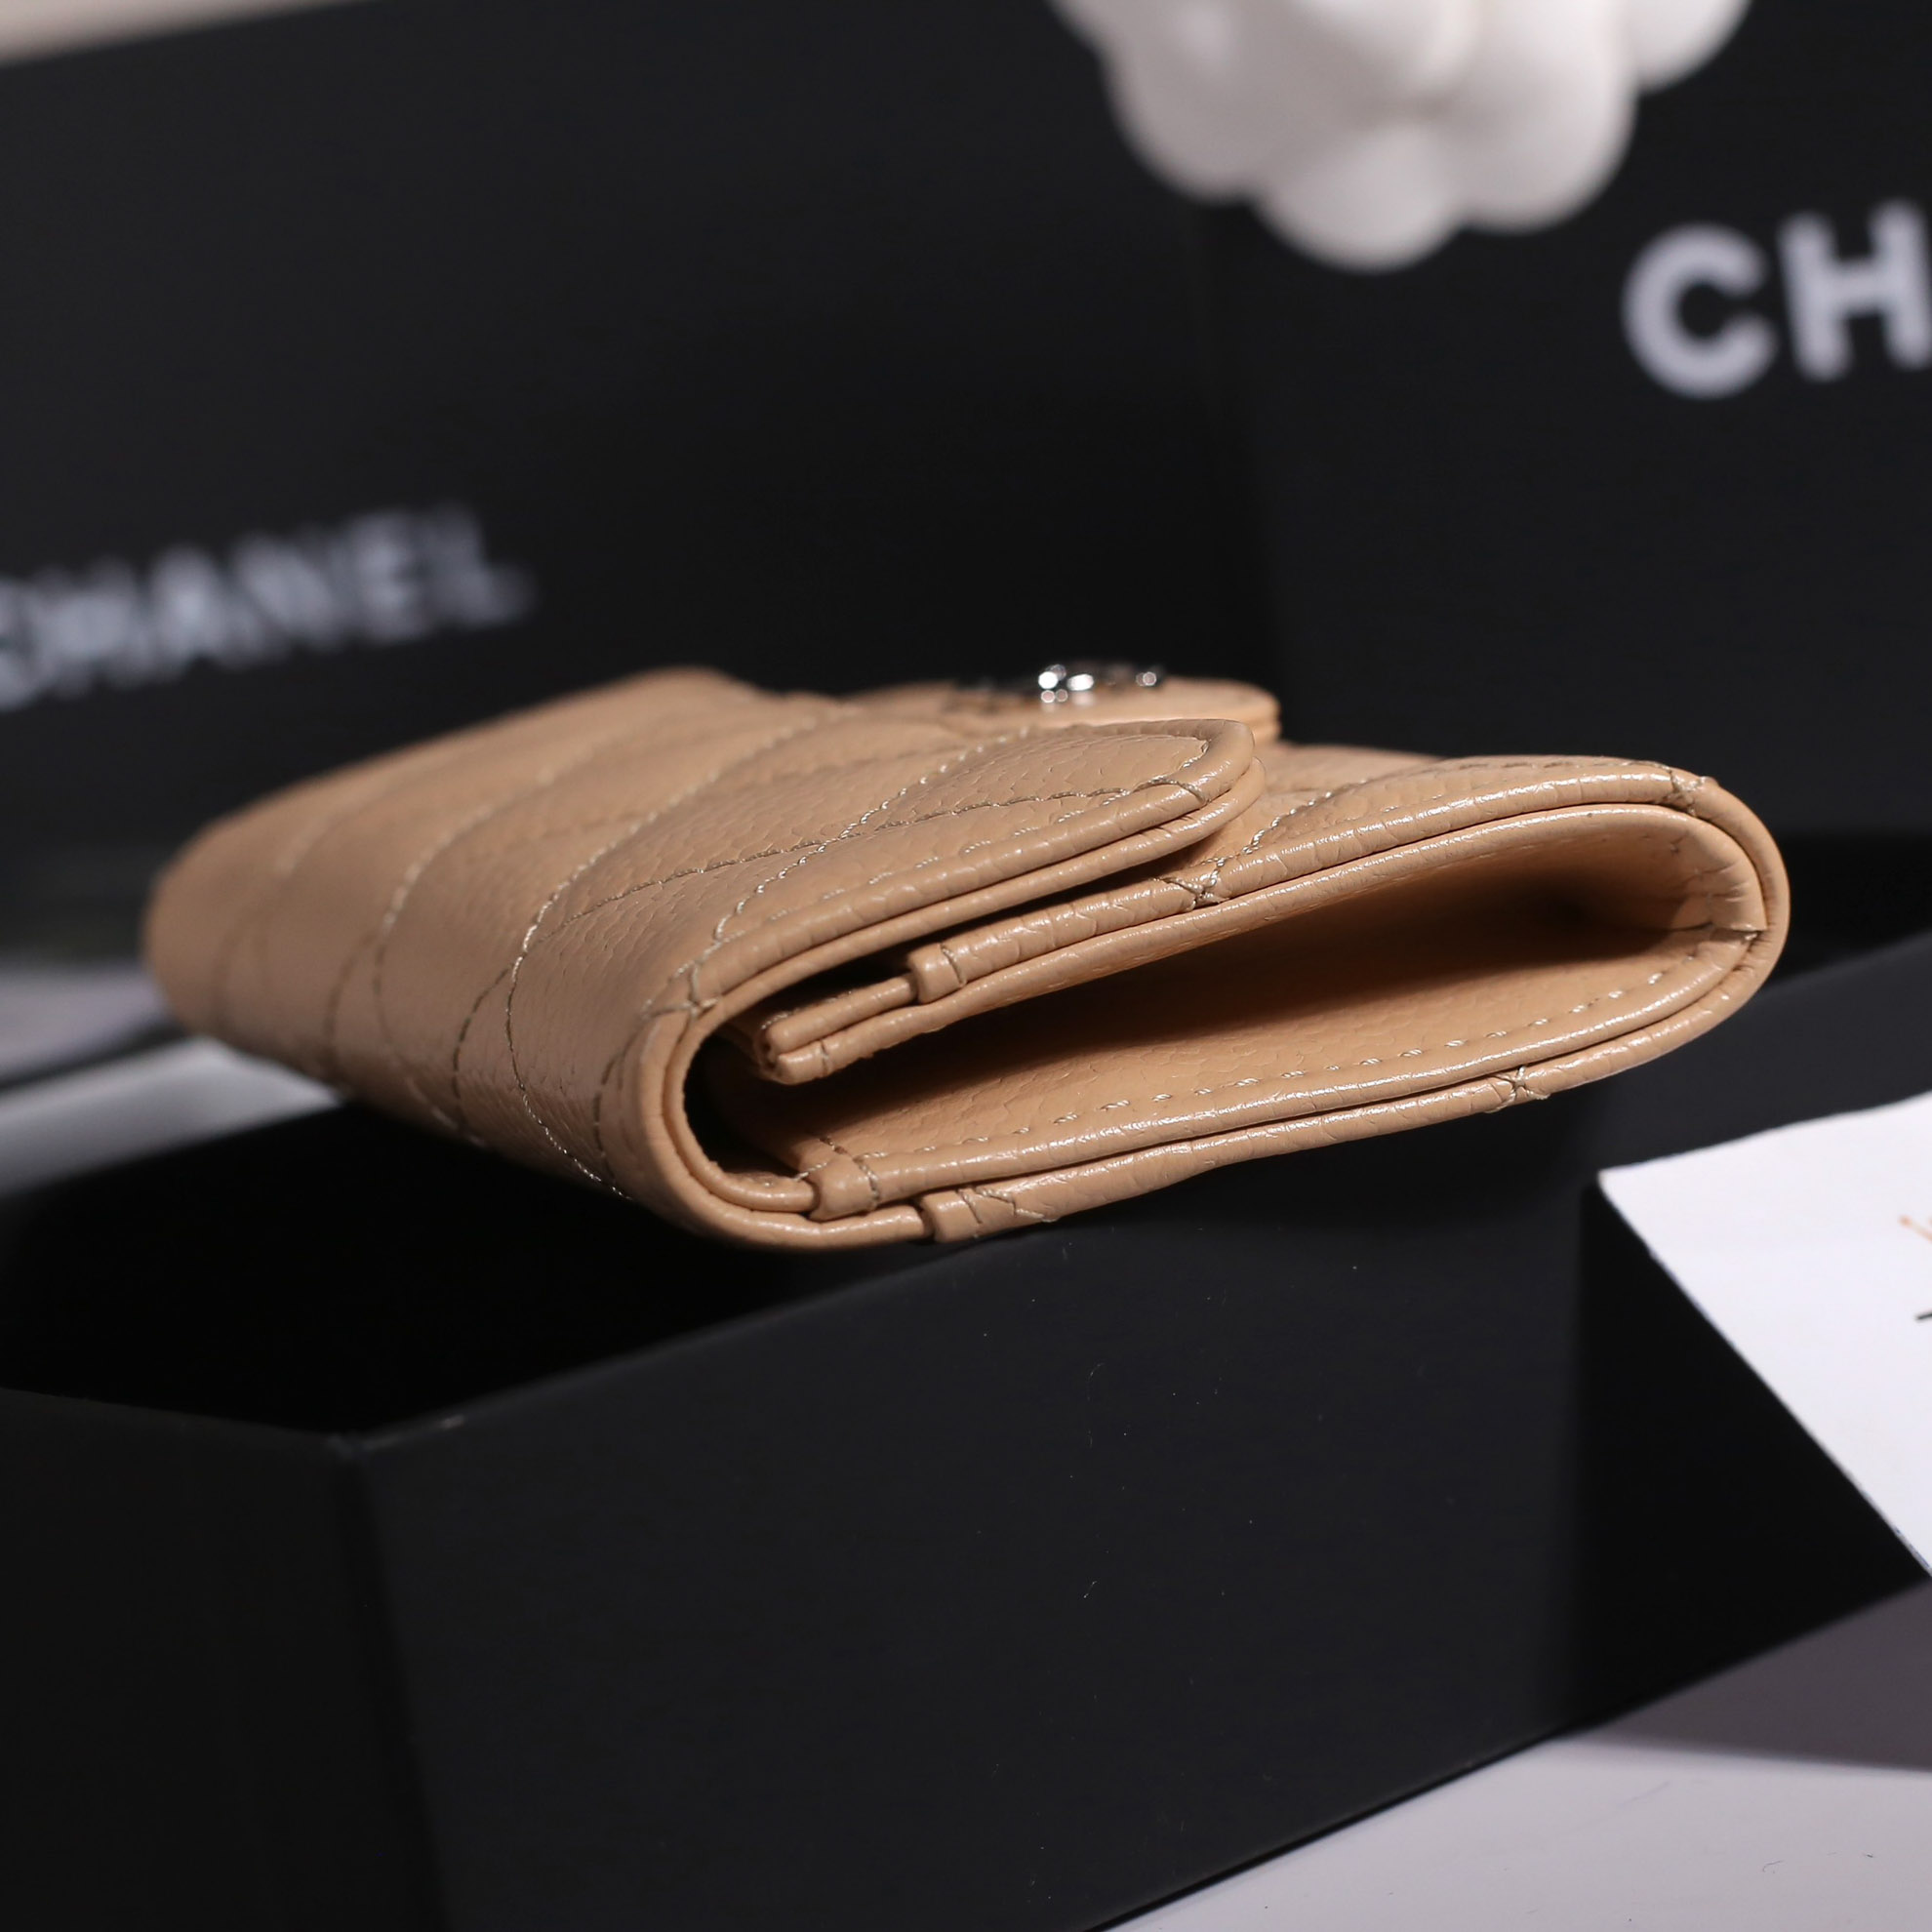 Ví Đựng Thẻ Chanel Caviar Quilted Flap Card Holder Wallet Beige